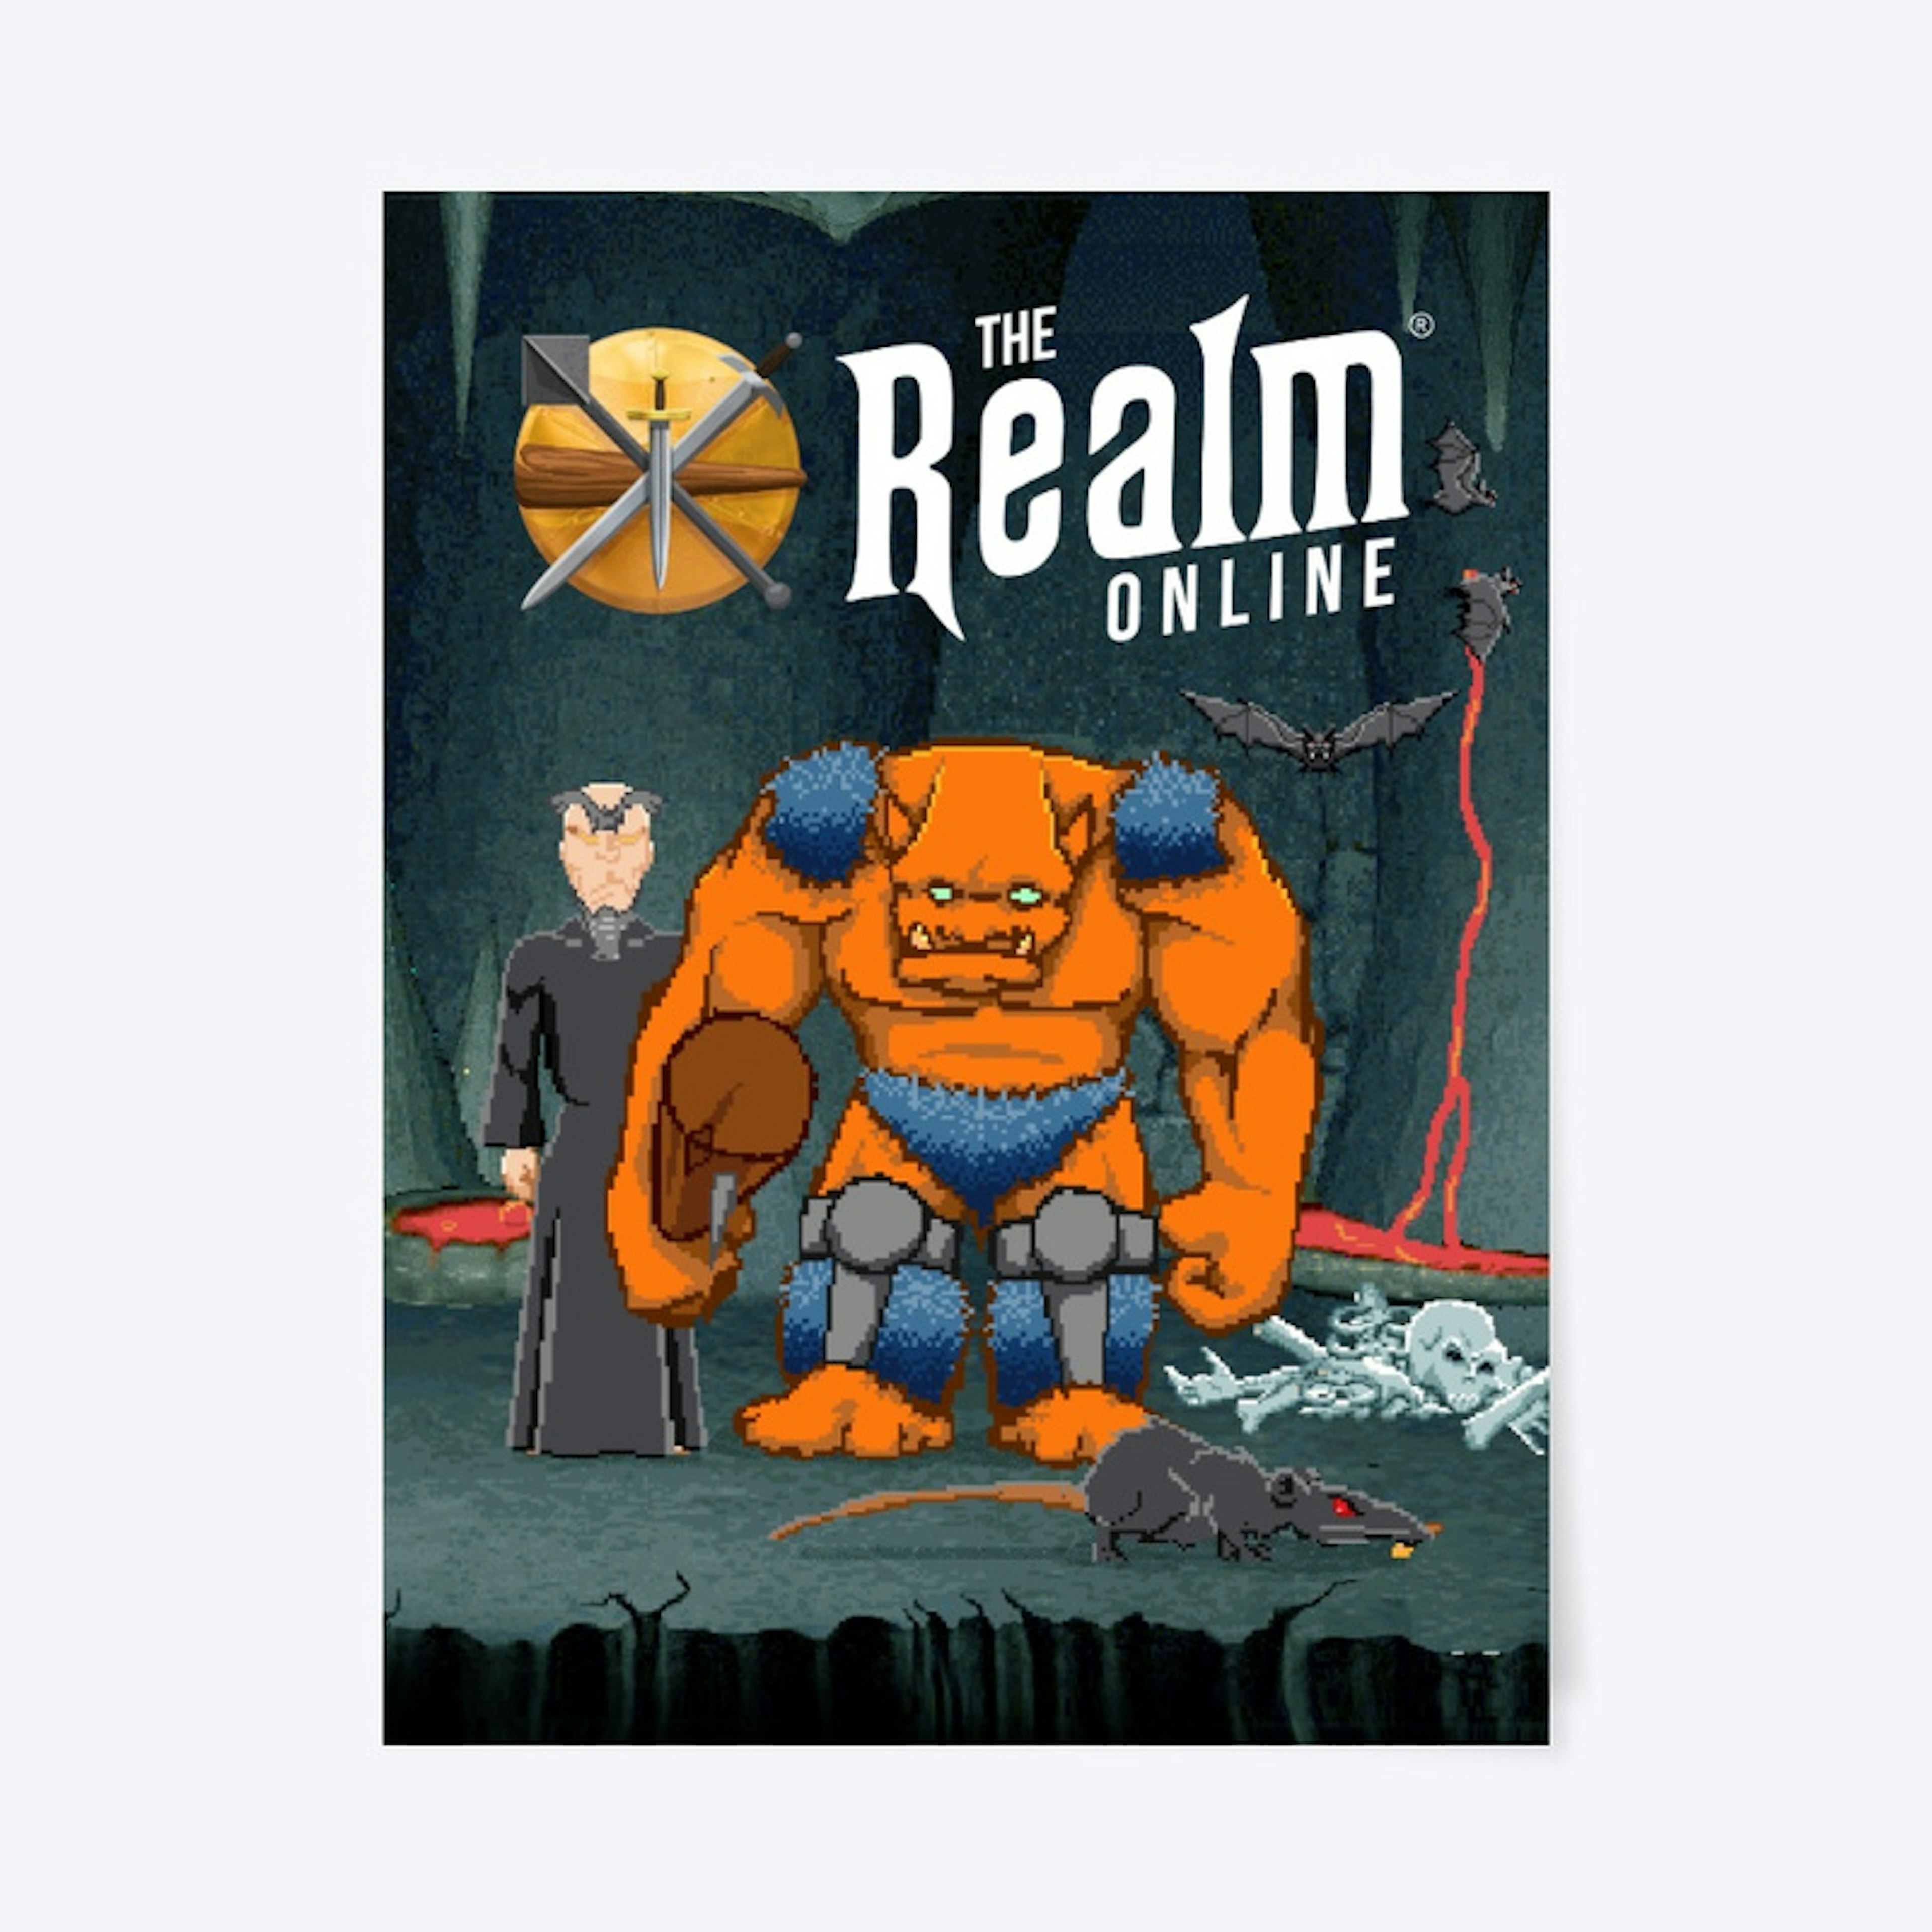 Poster 18x24" - The Realm Online Box Art